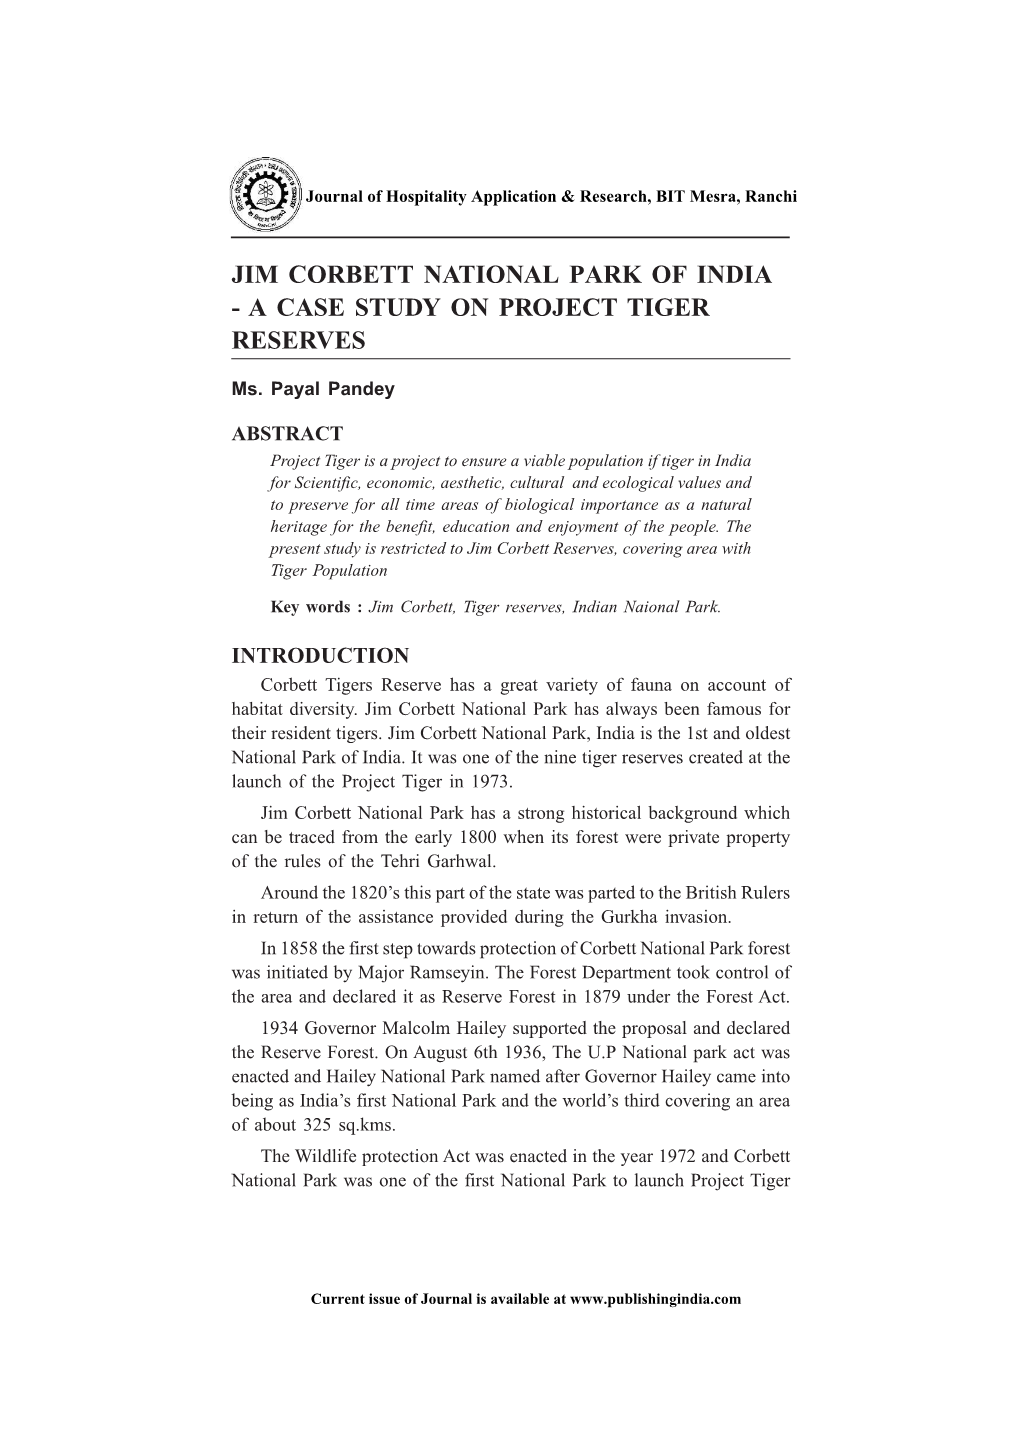 Jim Corbett National Park of India - a Case Study on Project Tiger Reserves